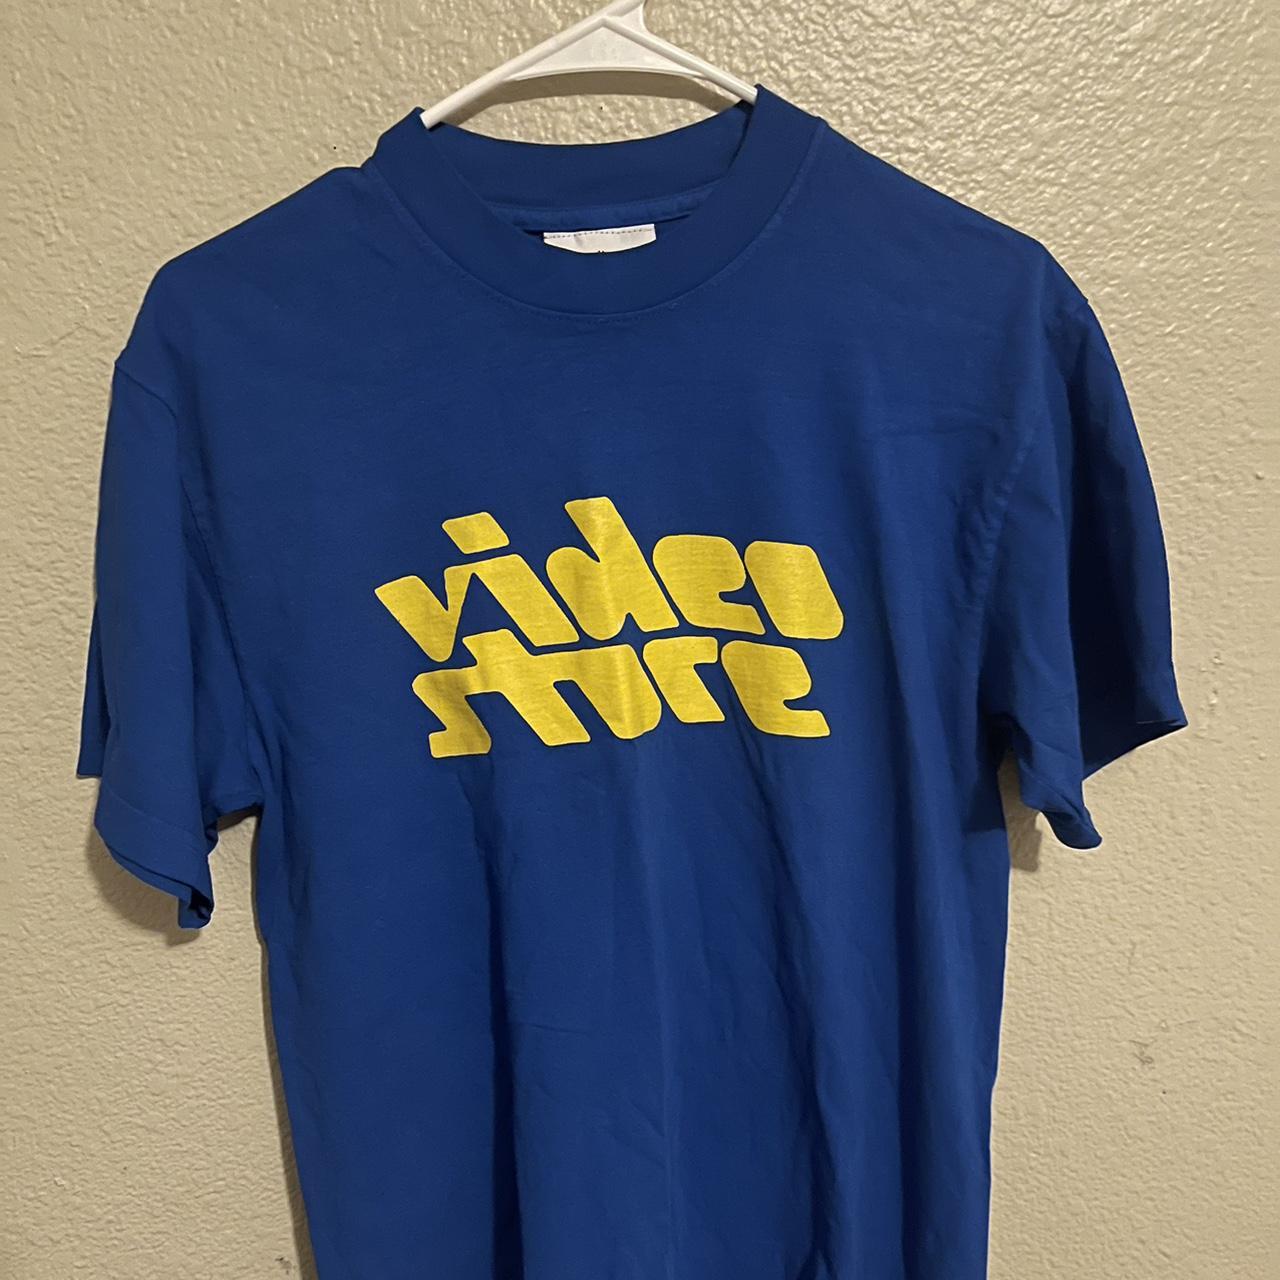 kevin abstract blue Video Store Apparel T shirt...